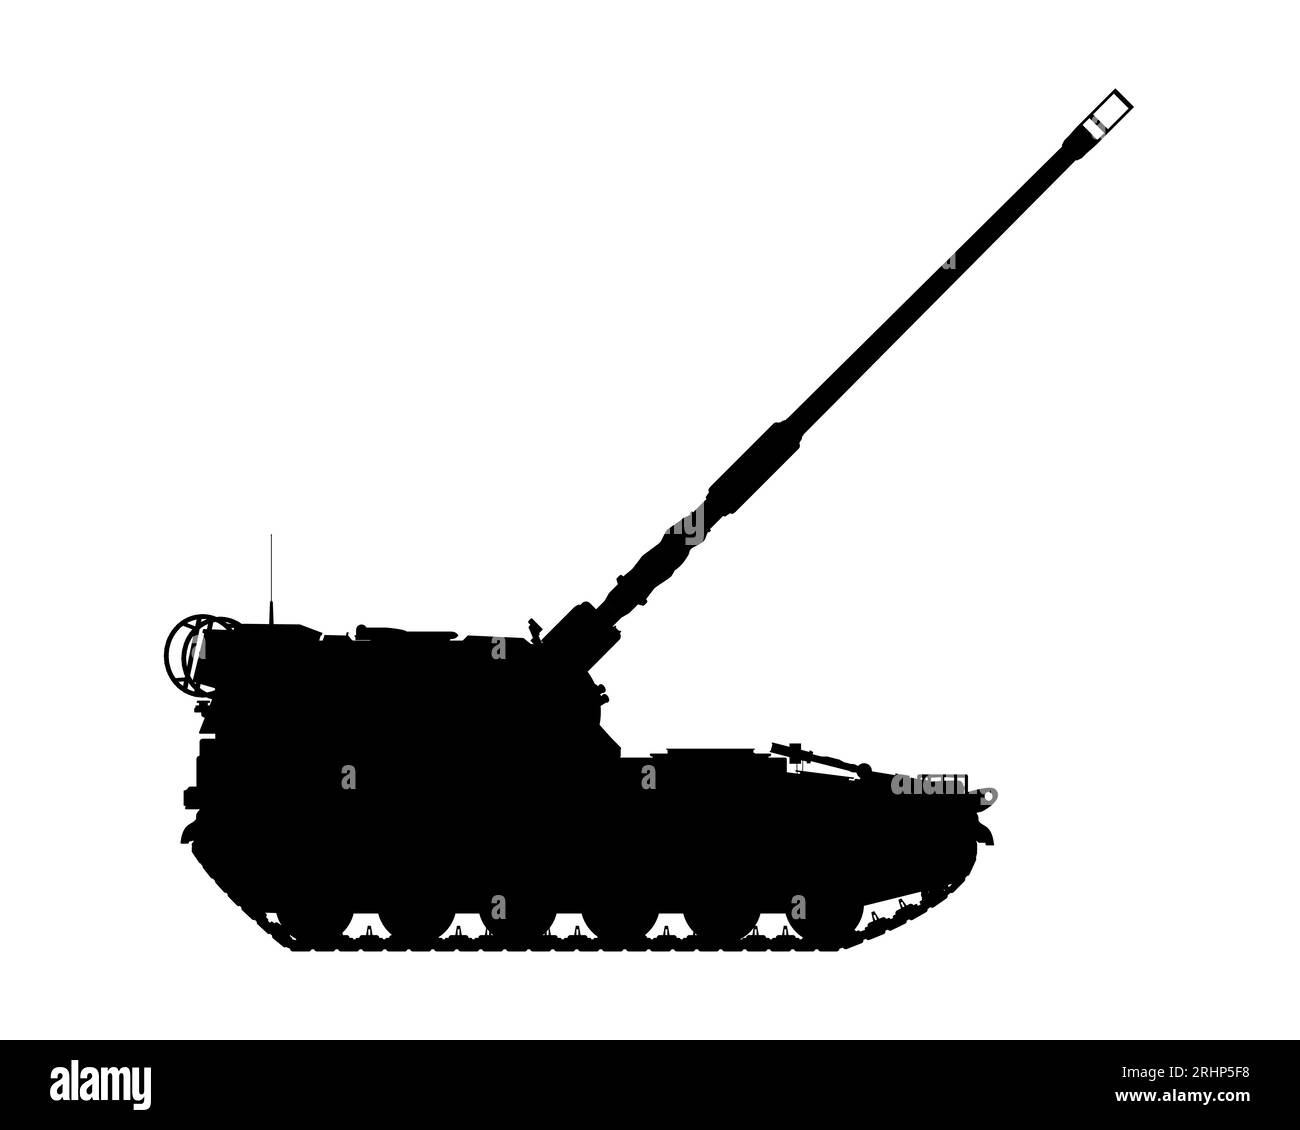 AHS Krab silhouette. Self-propelled artillery. Raised barrel. Poland army. Military armored vehicle. Detailed vector illustration isolated on white background. Stock Vector